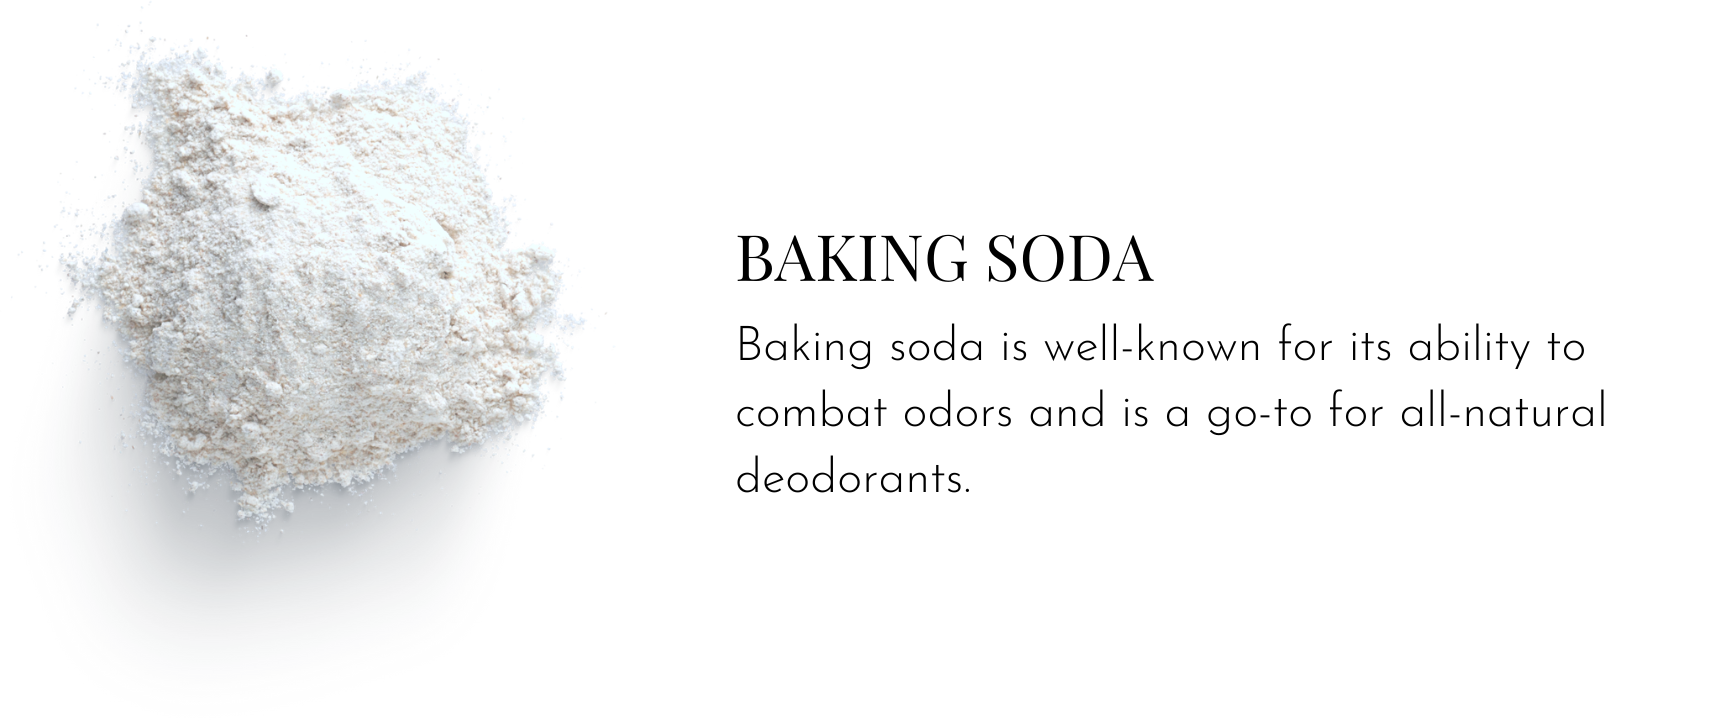 Baking Soda – Baking soda is well-known for its ability to combat odors and is a go-to for all-natural deodorants.